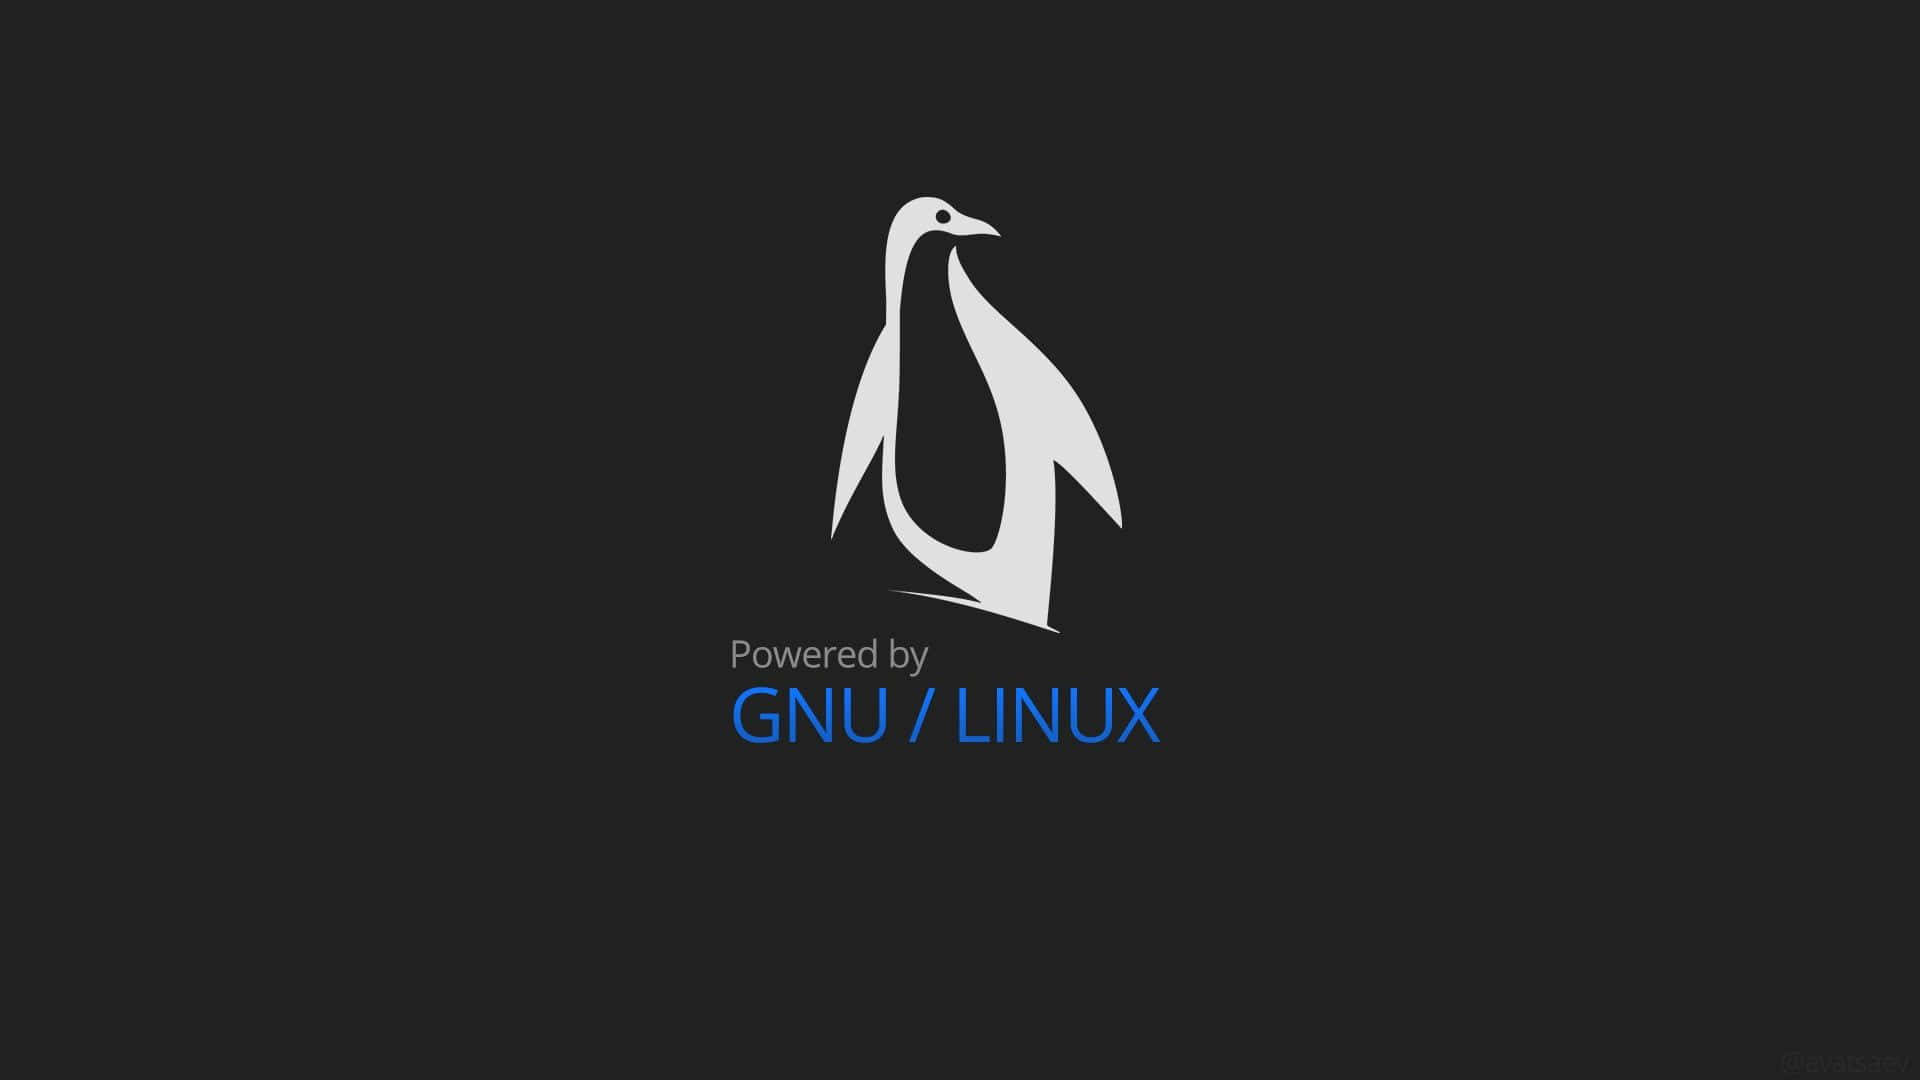 Linux users around the world